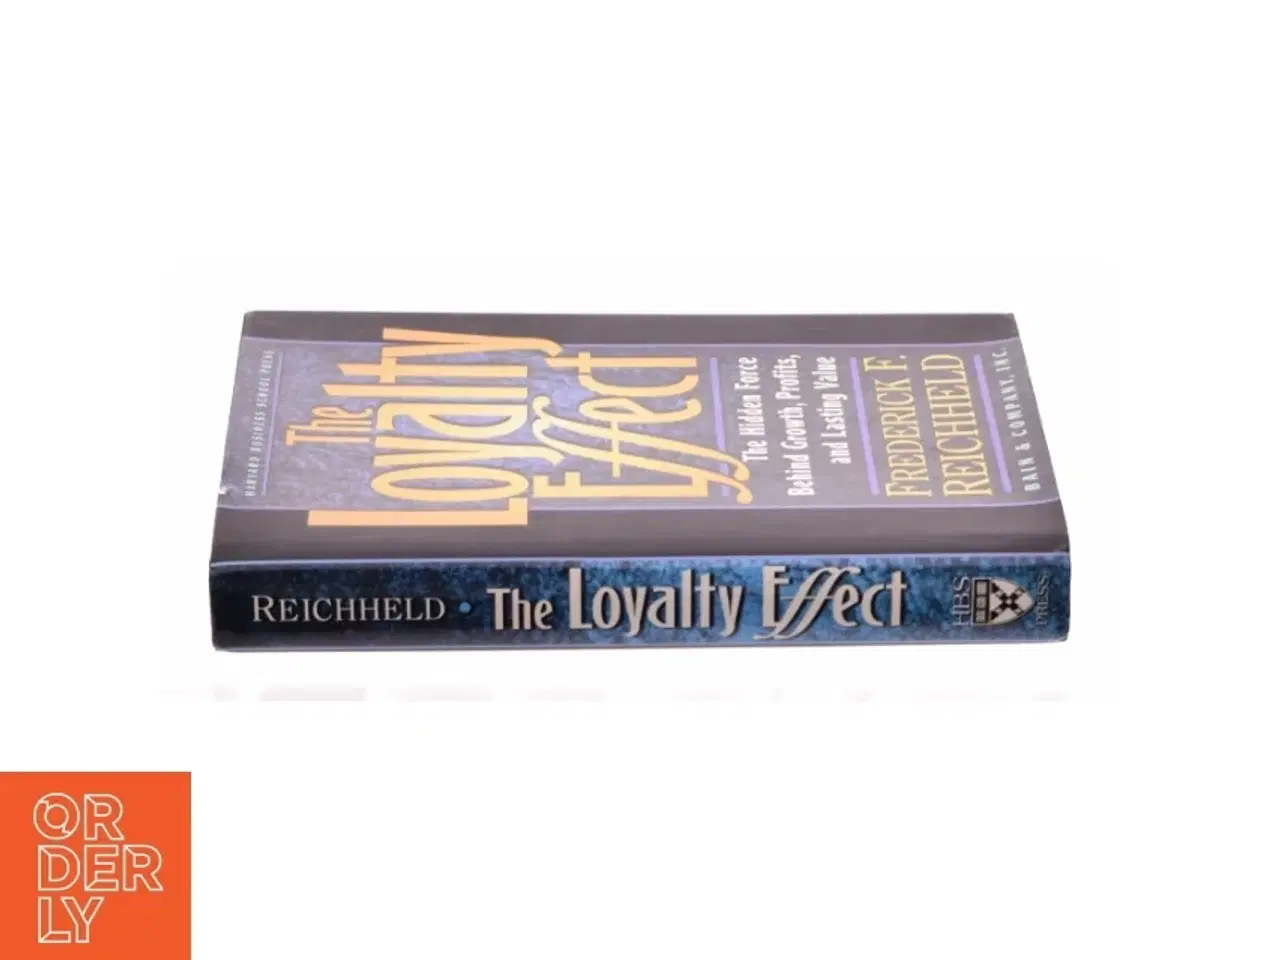 Billede 3 - The Loyalty Effect : the Hidden Force Behind Growth, Profits, and Lasting Value by Frederick F., Teal, Thomas Reichheld af Reichheld, Frederick F. / T